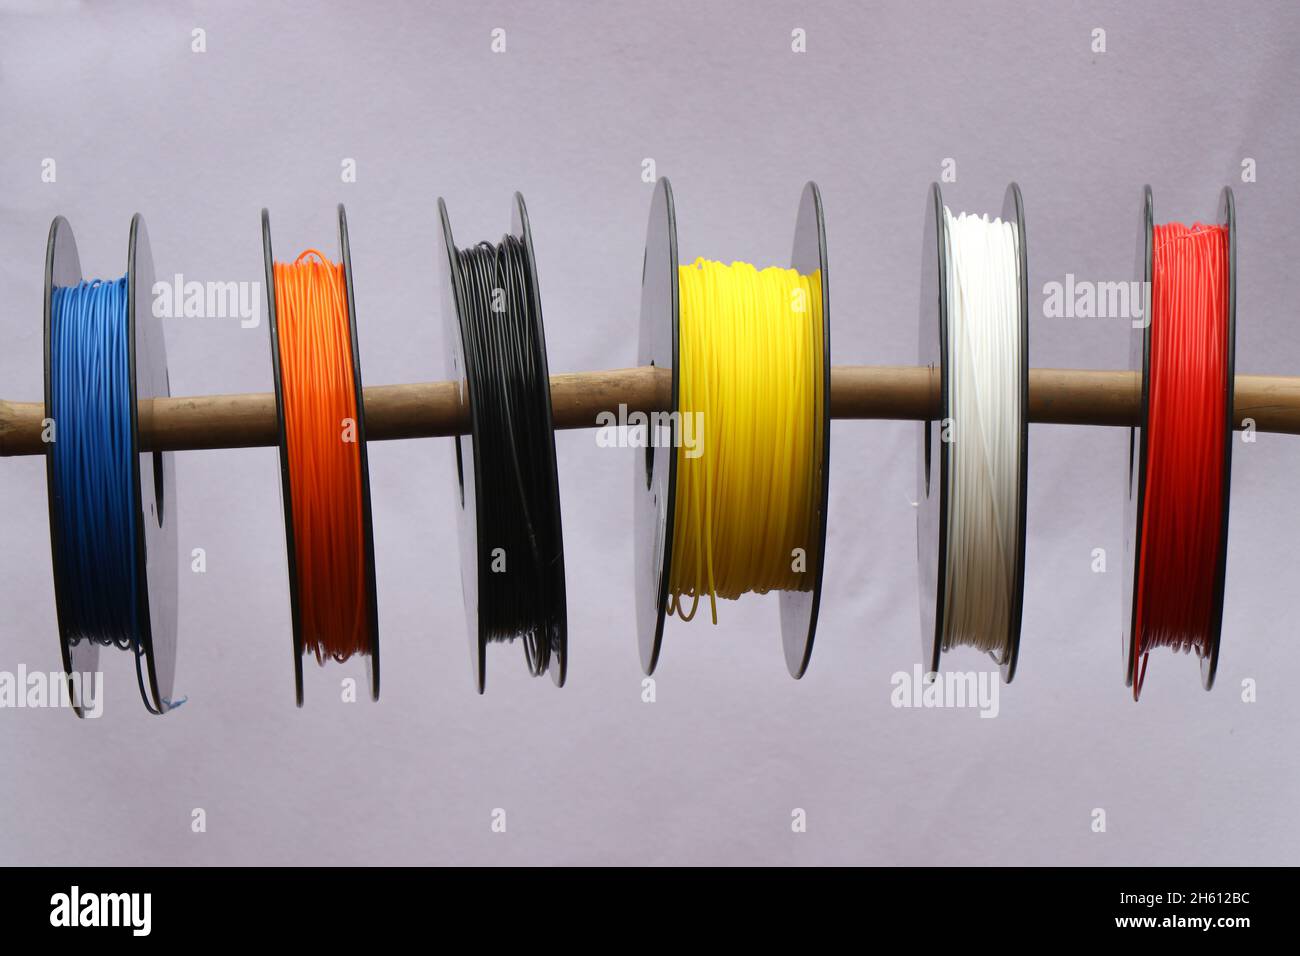 Reels of 3d printer filament for 3D printing or rapid prototype manufacturing methods Stock Photo